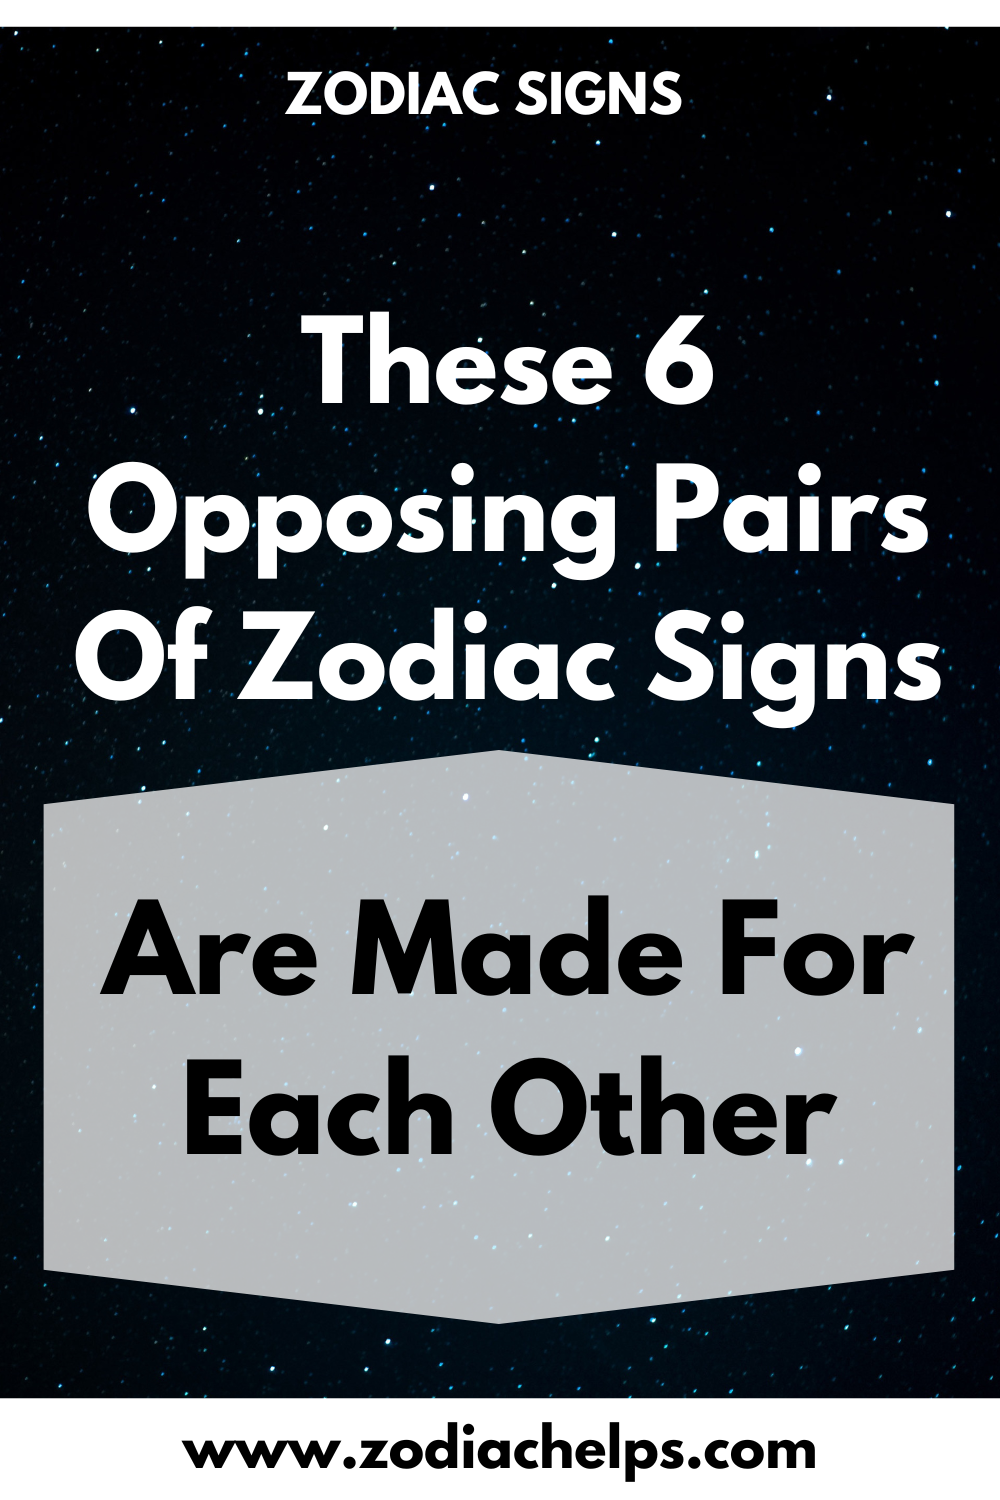 These 6 Opposing Pairs Of Zodiac Signs Are Made For Each Other